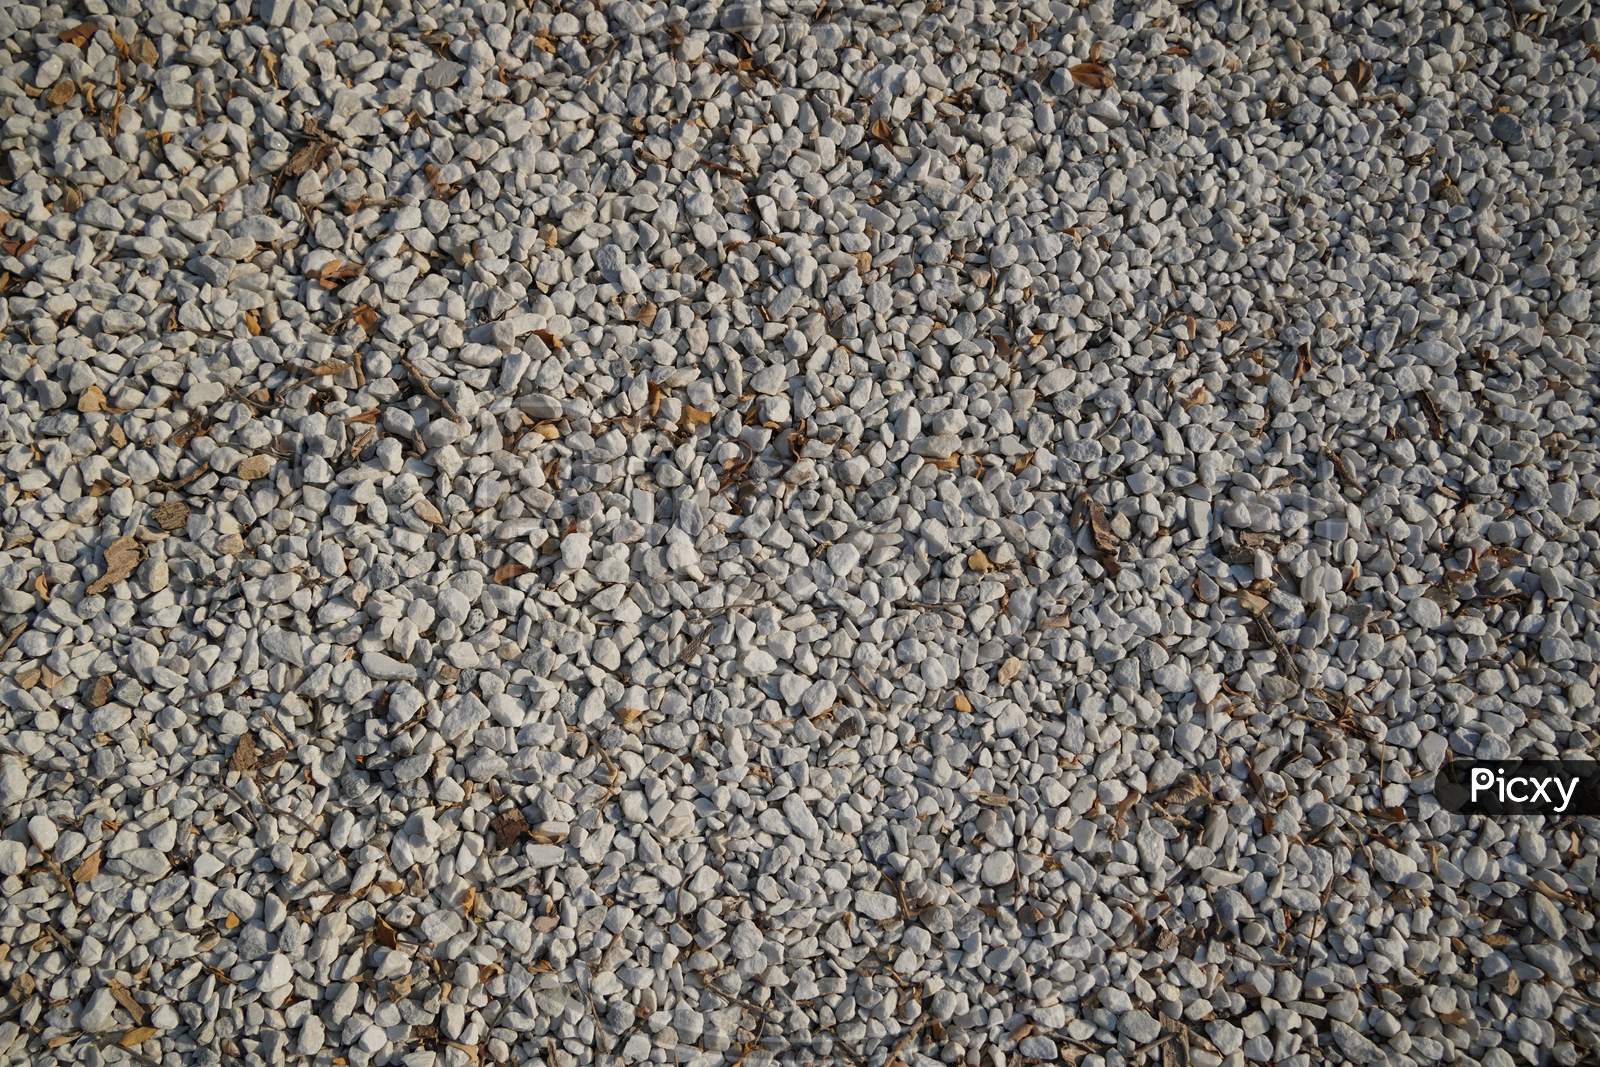 White And Brown Pebble Stone Texture For Background. The Texture Of Brown Gravel Stones.